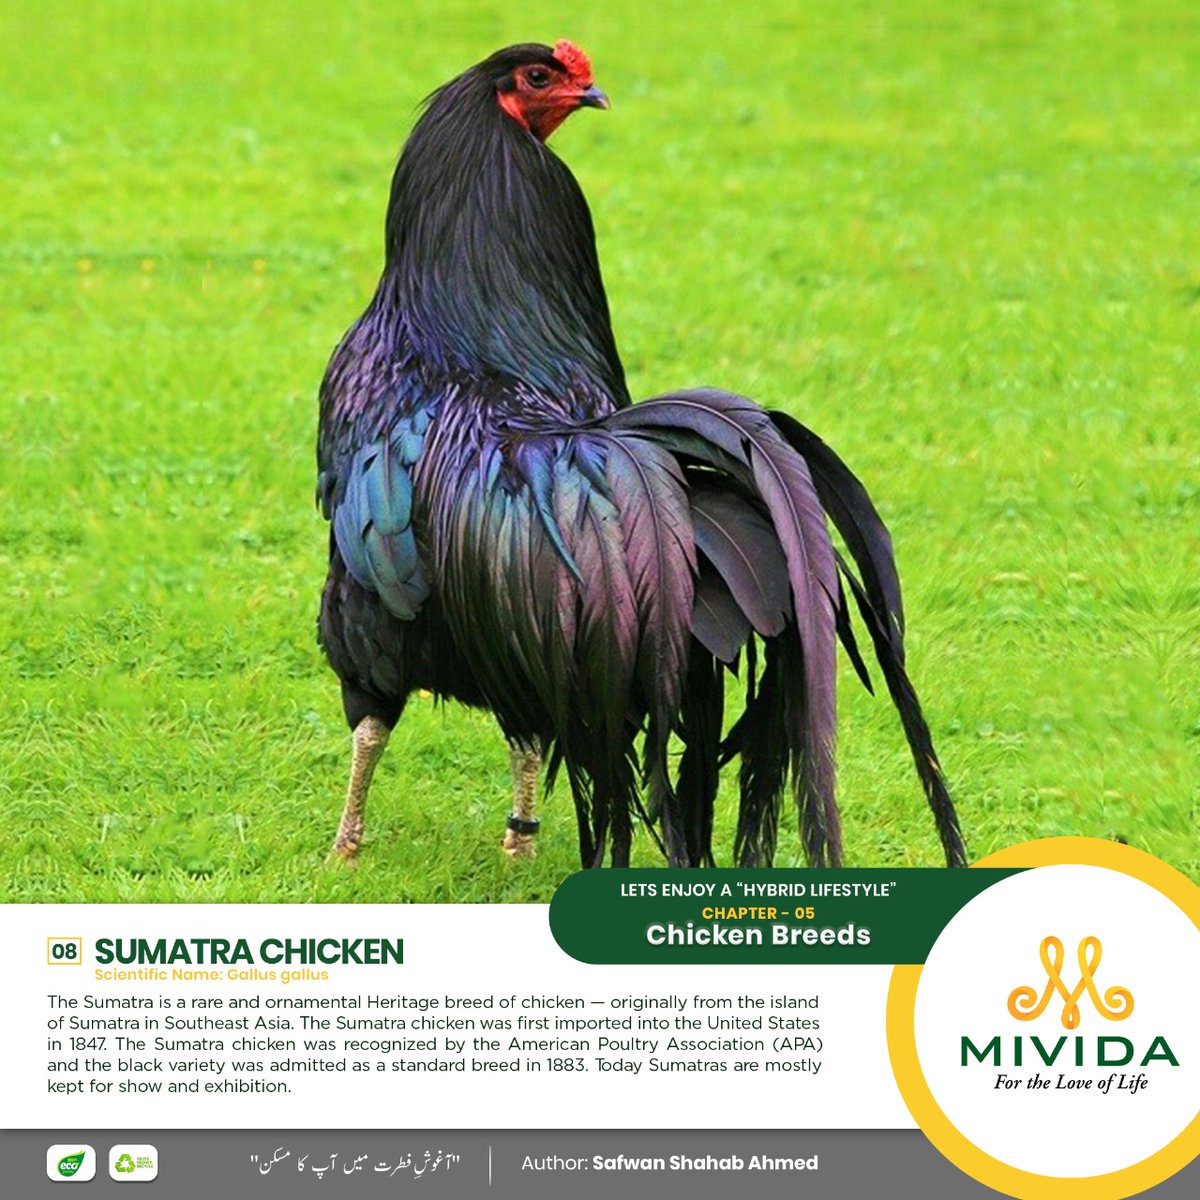 Let’s enjoy a “Hybrid Lifestyle”
Chapter – 05
Chicken Breeds

Sumatra Chicken (08)
Scientific Name: Gallus gallus

Please visit us on our official Facebook page for more details:
facebook.com/MIVIDAPakistan…

#MIVIDA #mividapakistan #ecosustainable #chickenbreeds #sumatrachicken